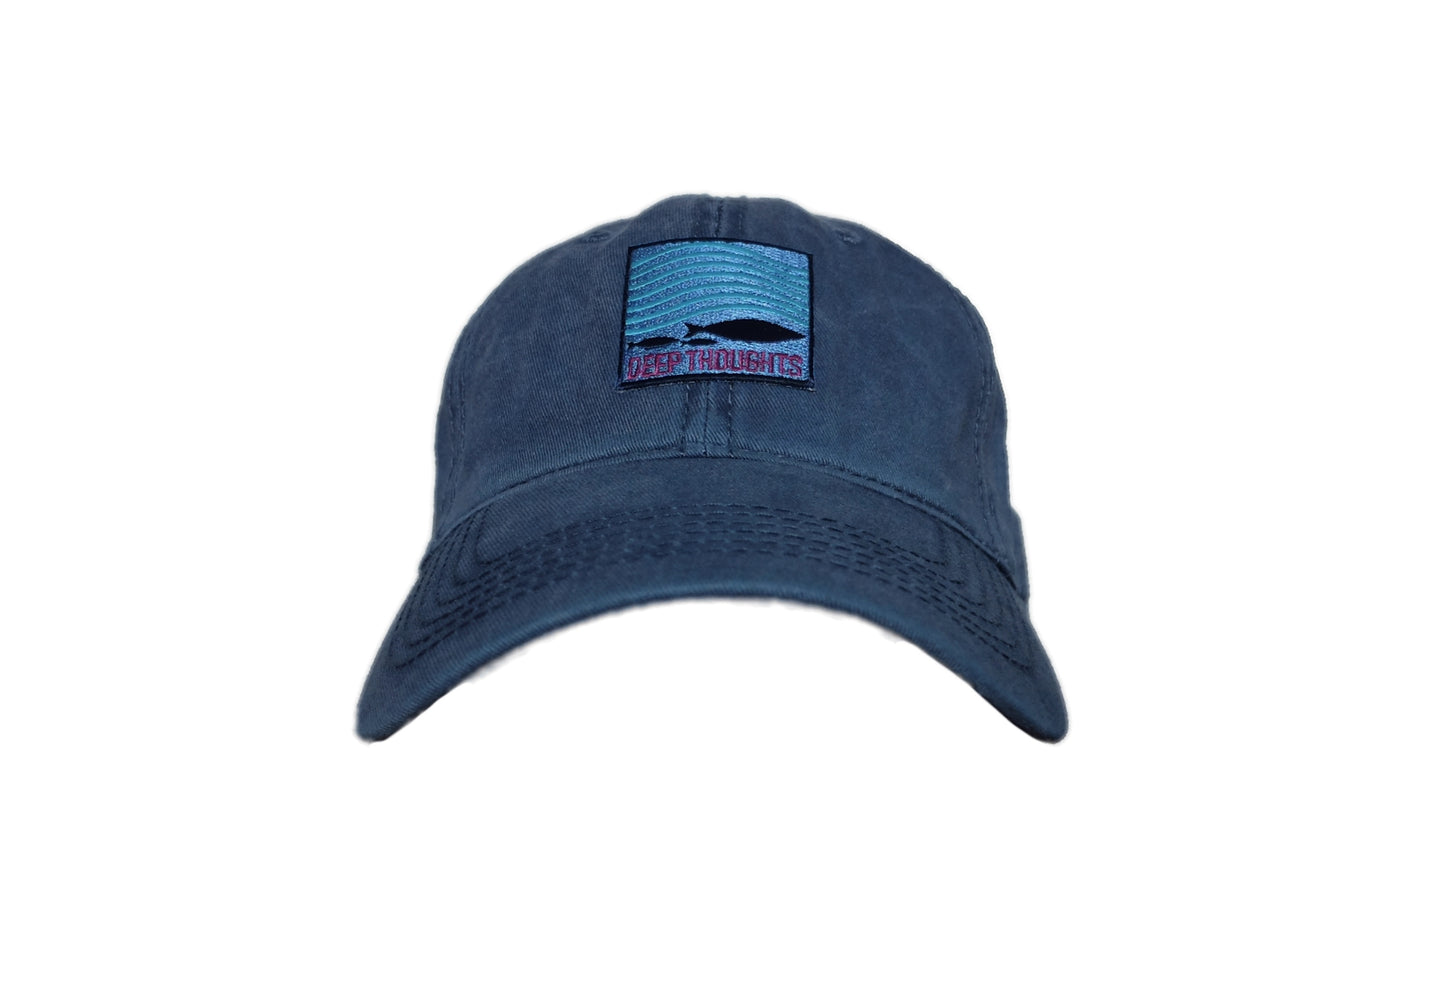 washed navy blue cap with square embroidered patch showing fish under waves and Deep Thoughts text